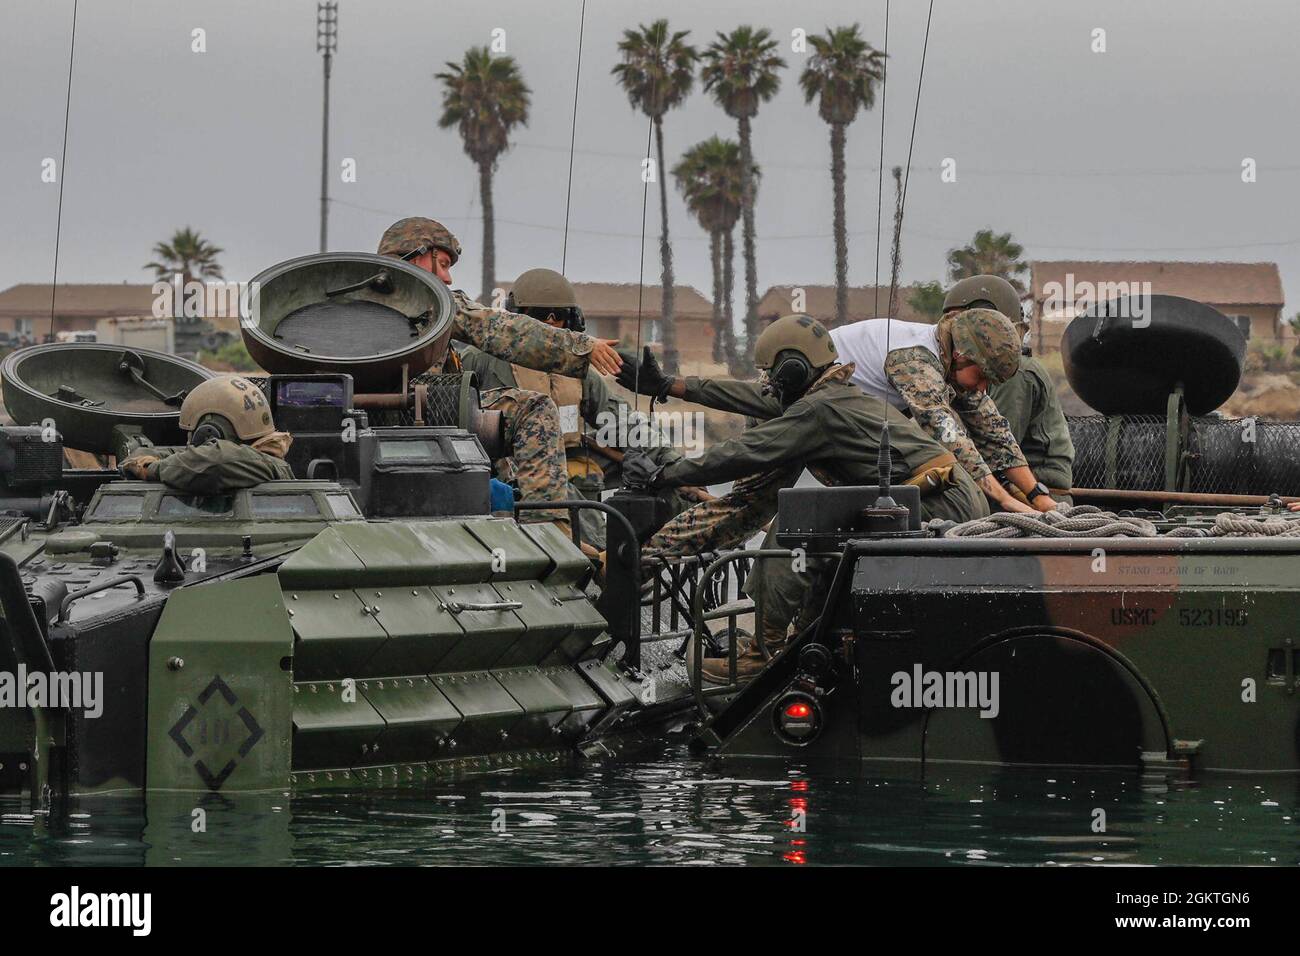 U.S. Marines with Co. A, 1st Battalion, 5th Marine Regiment, 1st Marine Division (1st MARDIV) and Co. B, 3d Assault Amphibian Battalion, 1st MARDIV, conduct water operations training at Marine Corps Base Camp Pendleton, California, June 29, 2021. The training was conducted to ensure Marines are proficient with safety procedures for water operations. Stock Photo